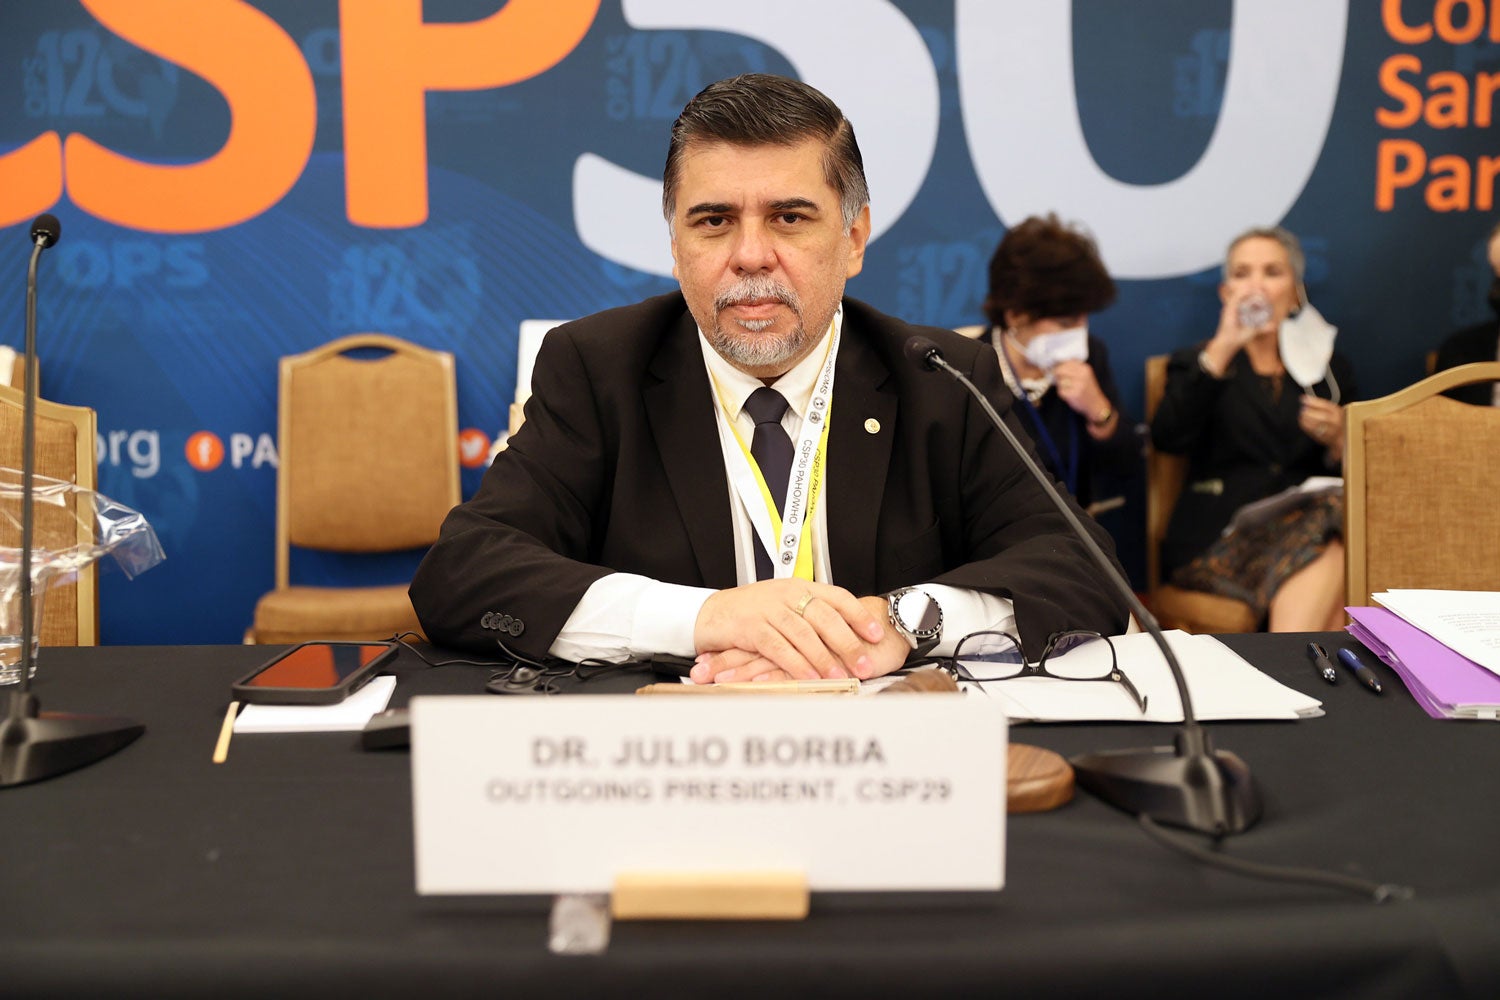 Dr. Julio Borba, Minister of Public Health and Social Welfare of Paraguay, Outgoing President of the Pan American Sanitary Conference